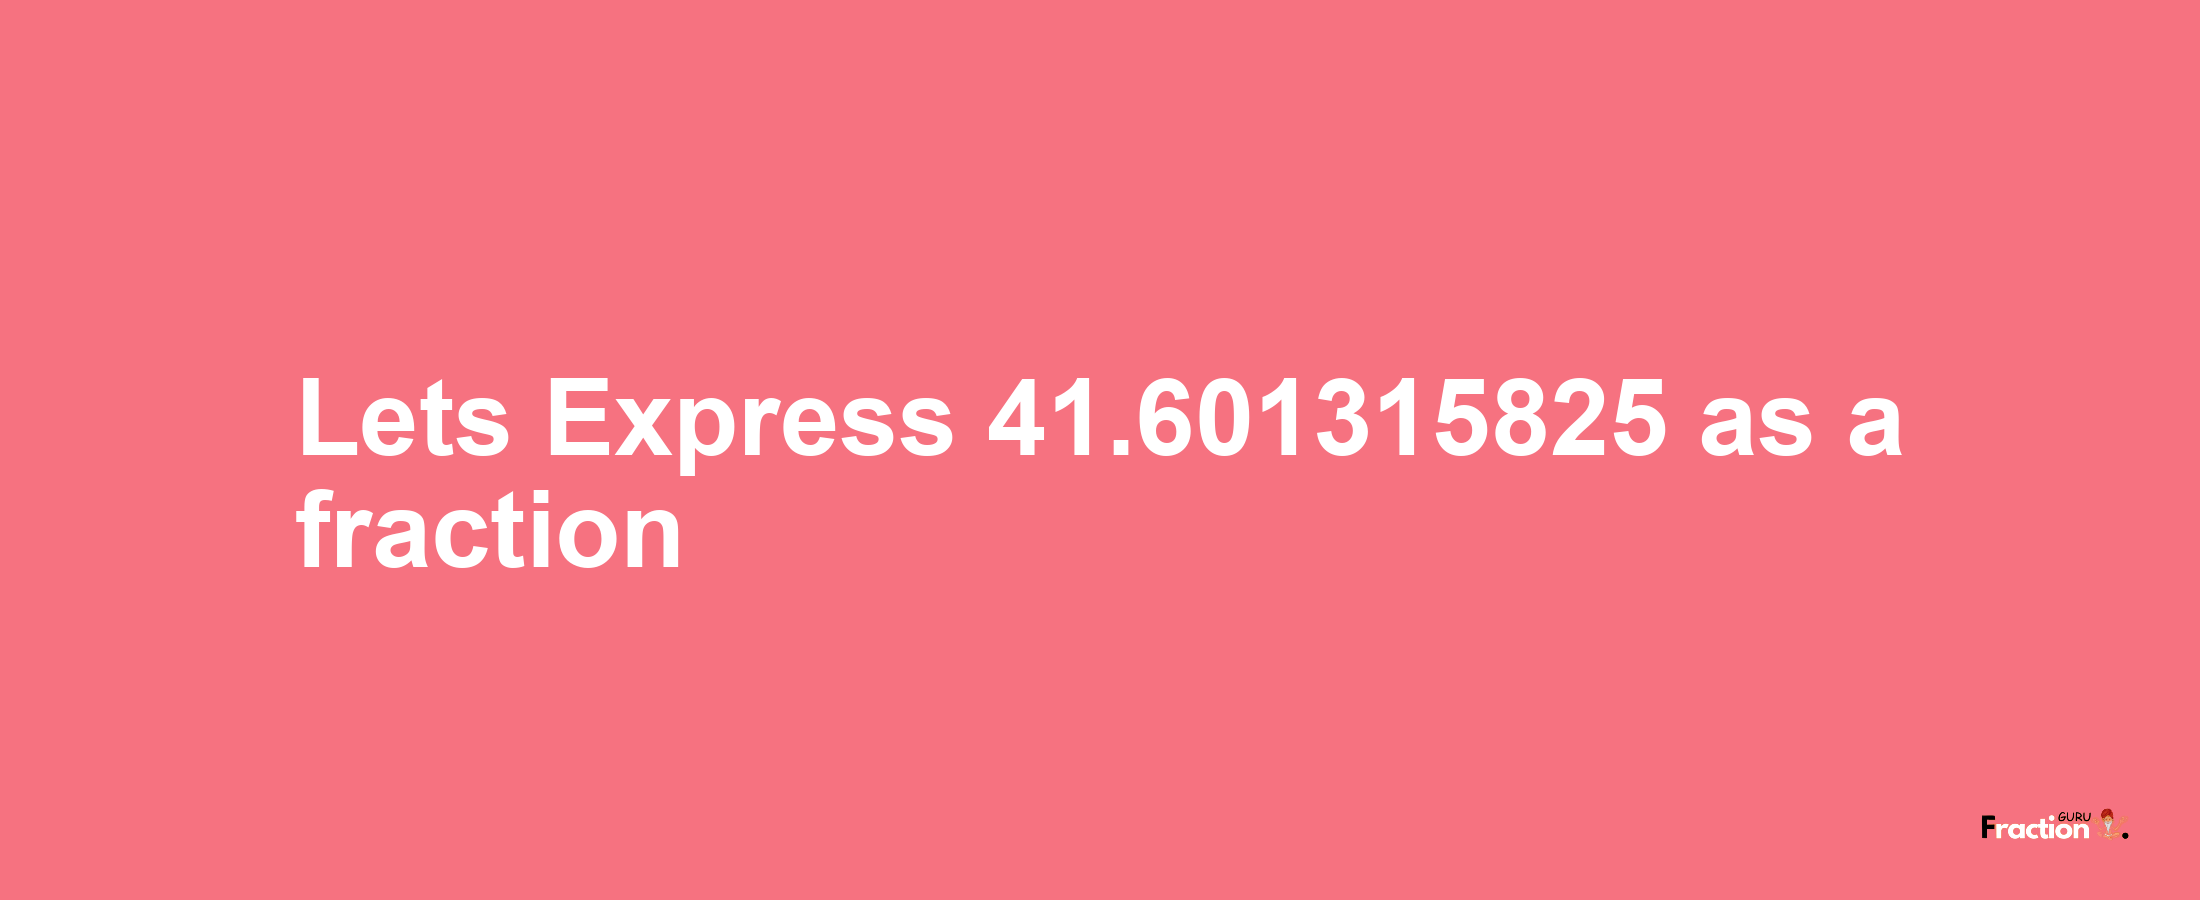 Lets Express 41.601315825 as afraction